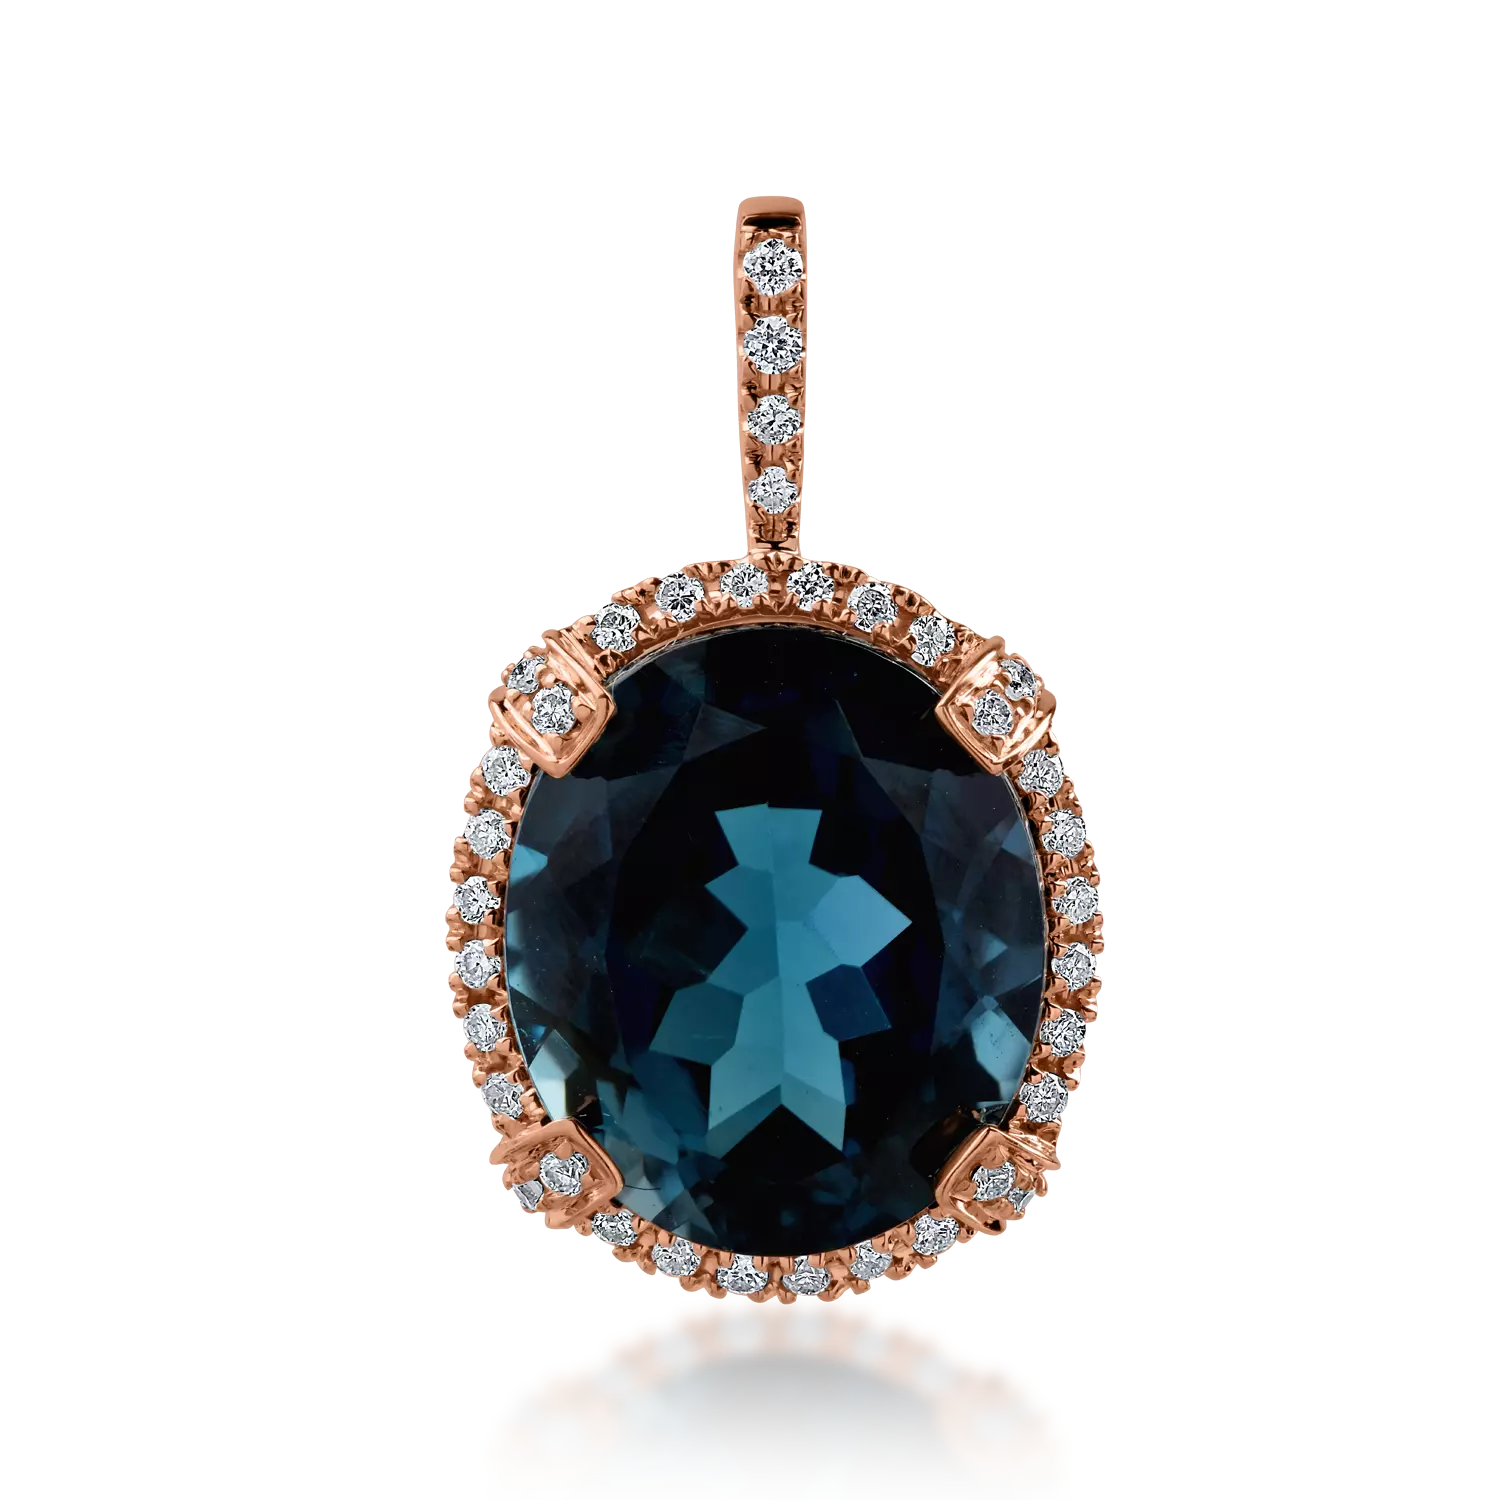 Rose gold pendant with 5.7ct london blue topaz and 0.19ct diamonds